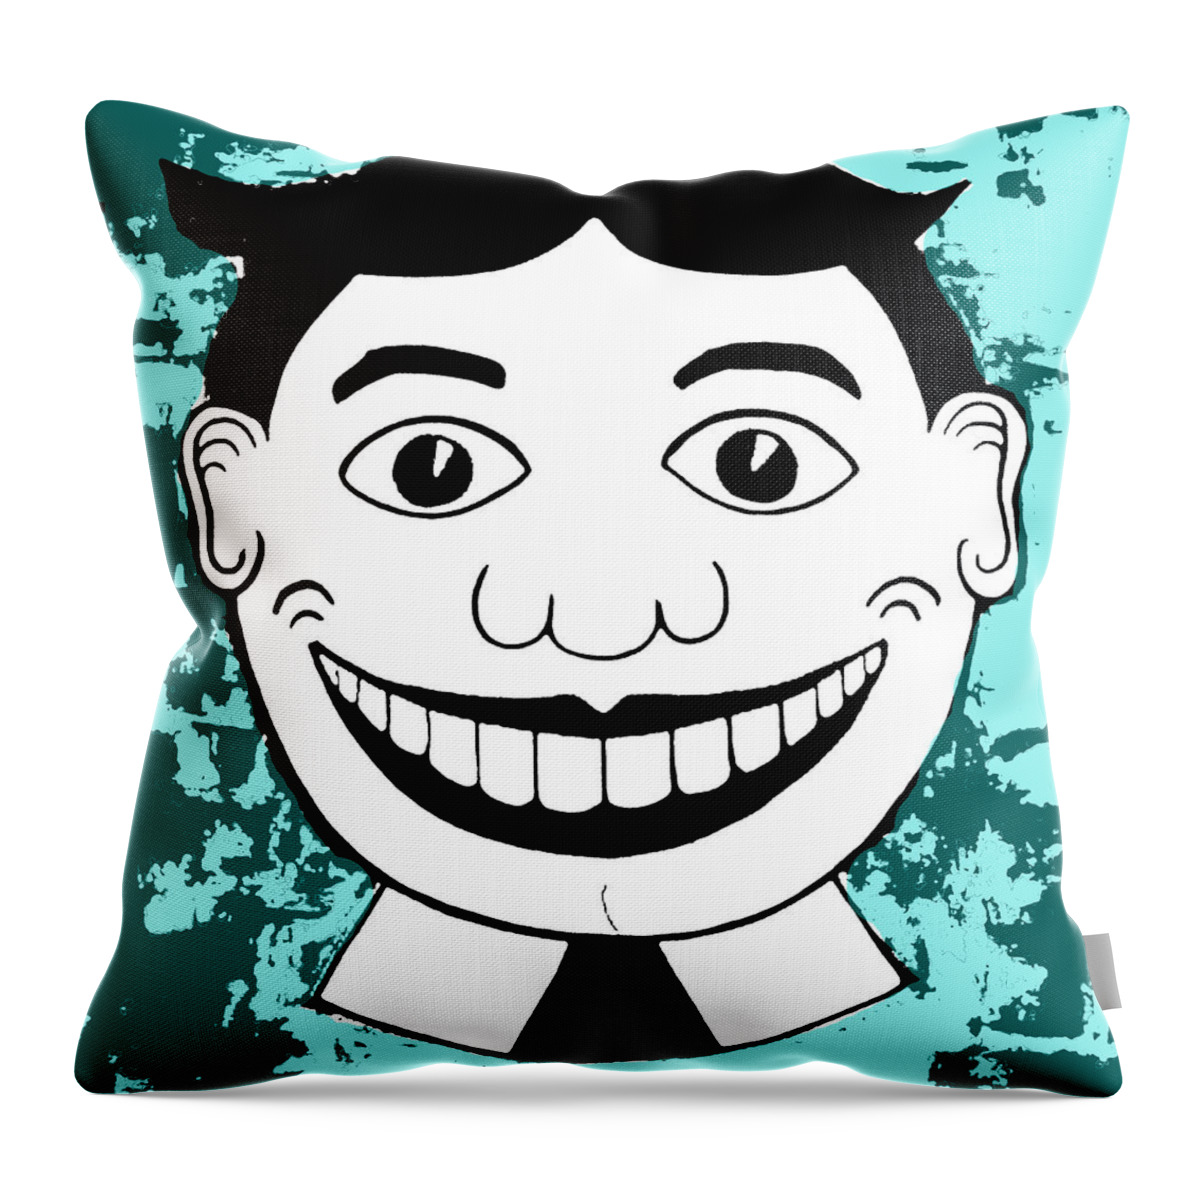 Patricia Arroyo Asbury Art Throw Pillow featuring the painting Aqua Pop Tillie by Patricia Arroyo